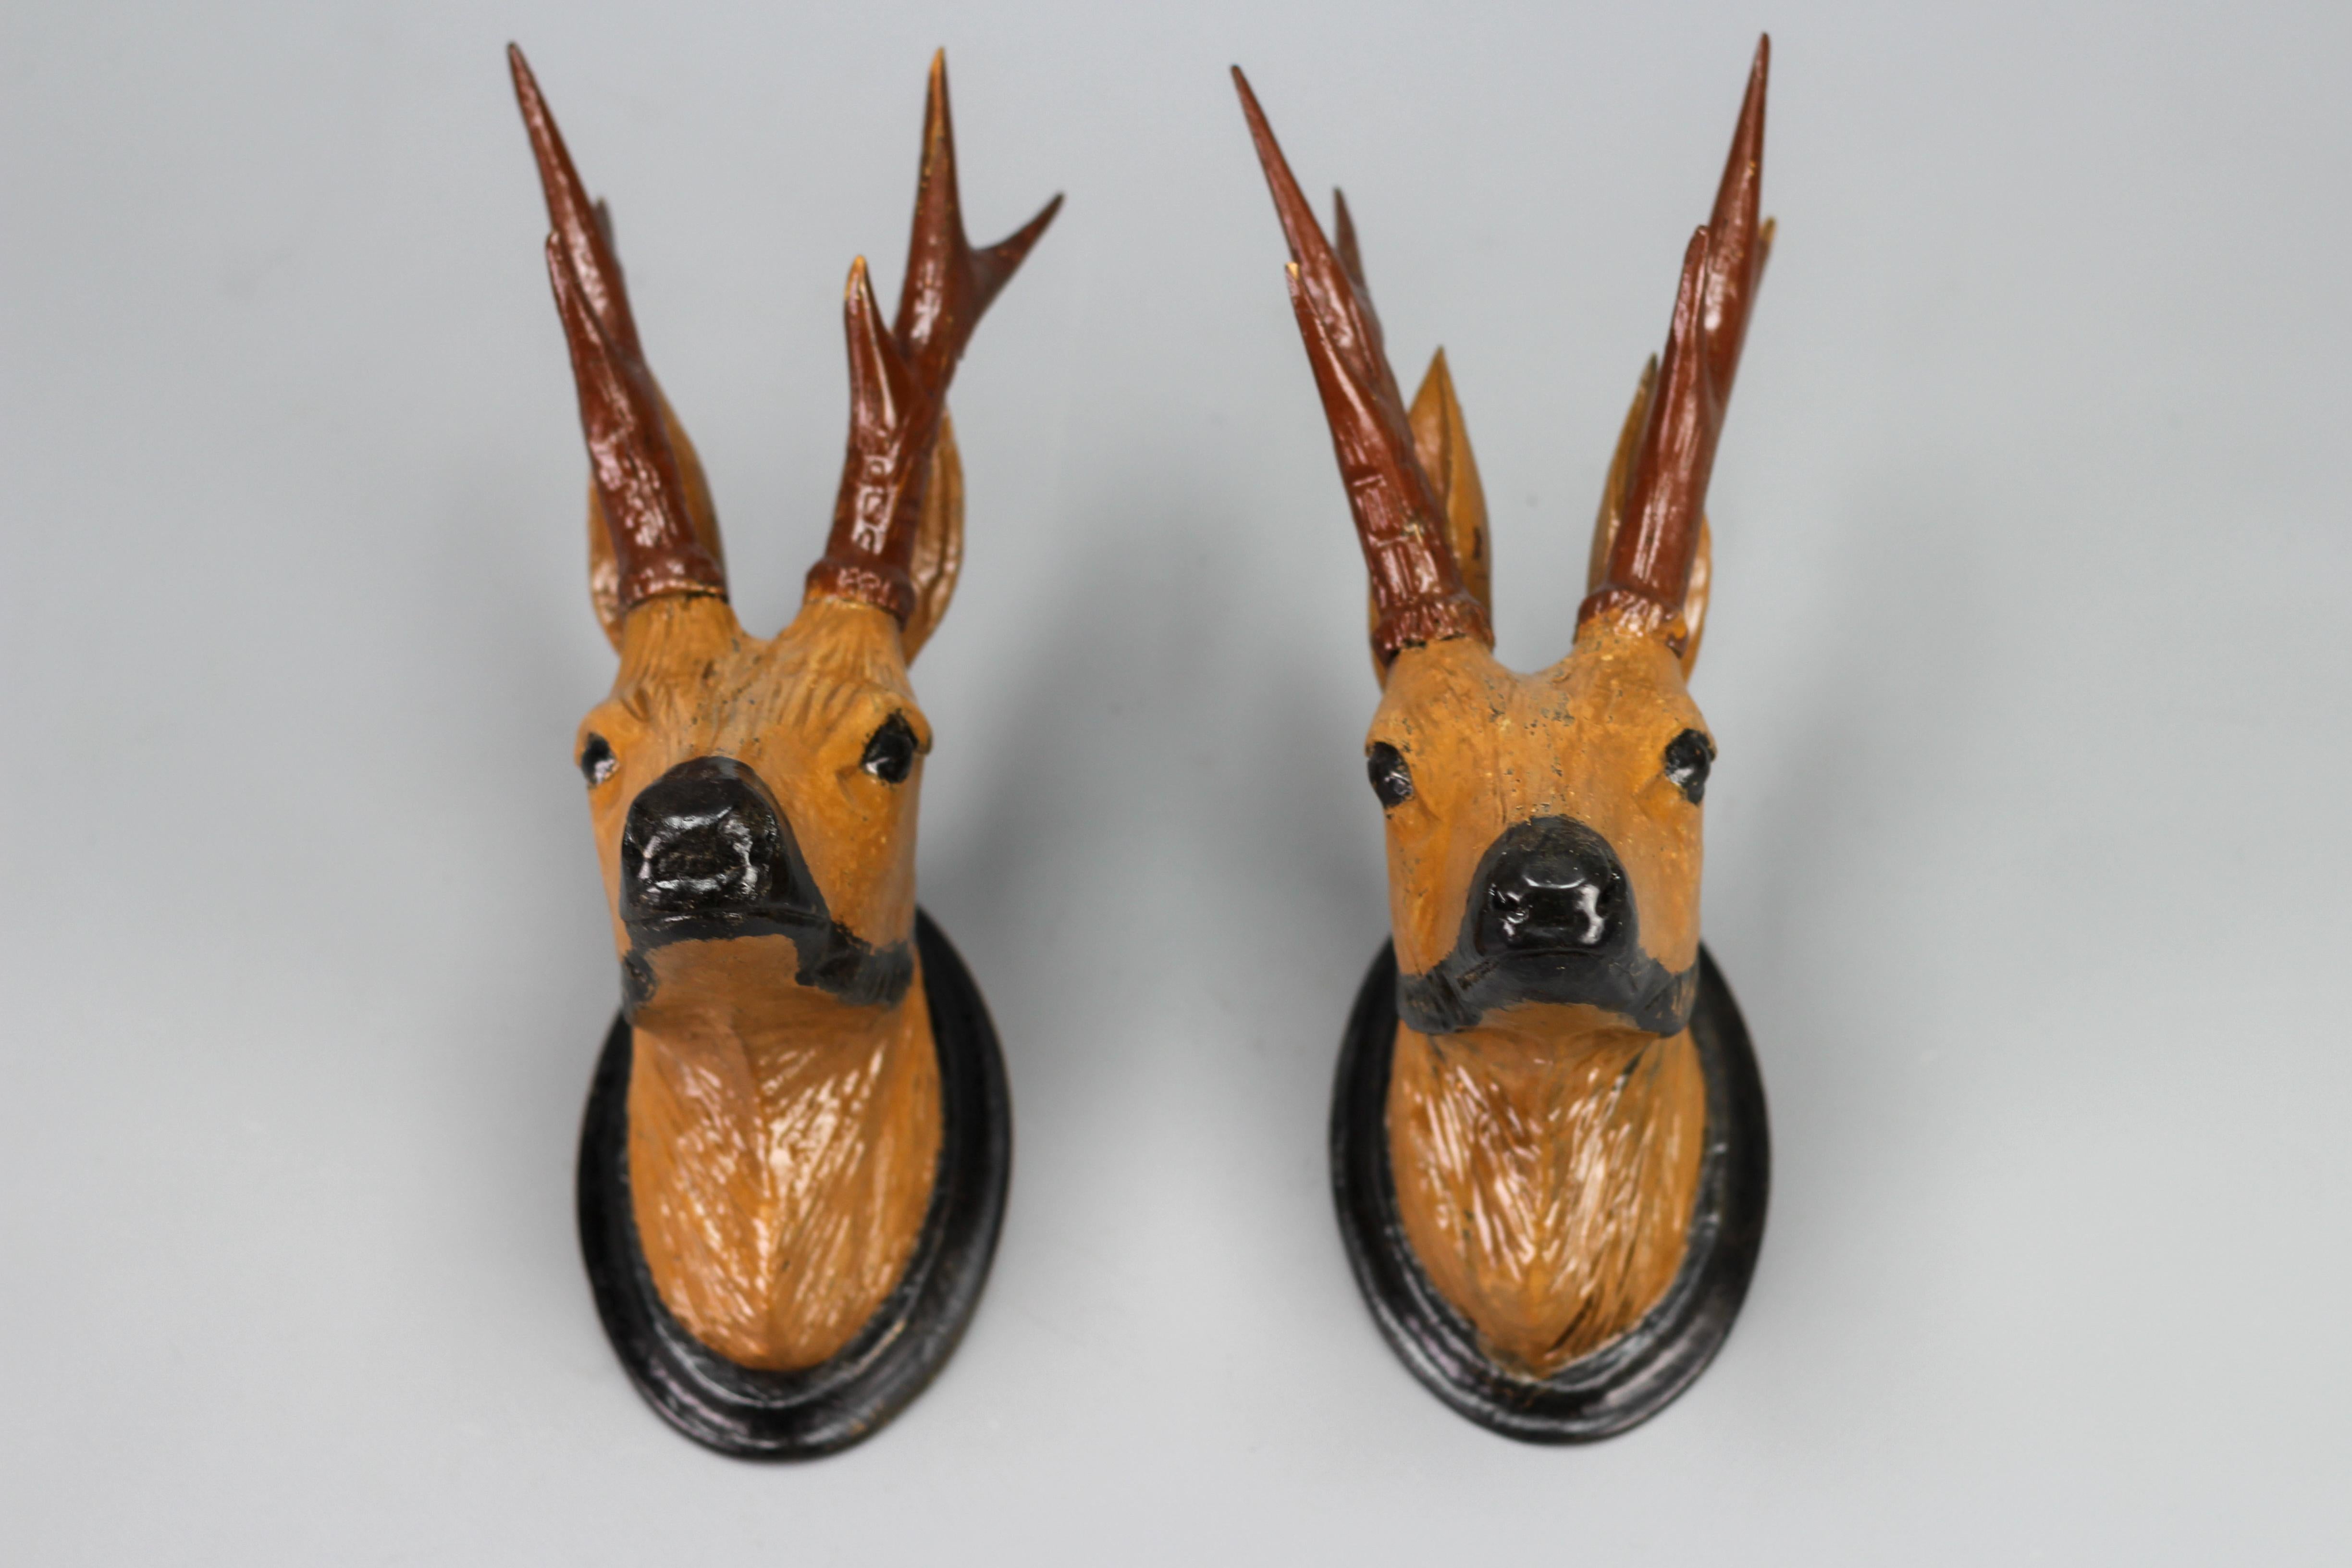 Carved Wooden Roe Deer Heads wall mounts decoration, Germany, 1930s, Set of Two
This absolutely adorable pair of roe deer heads is hand-carved of wood and hand-painted in light and dark brown and black colors. The antlers of both deer heads are